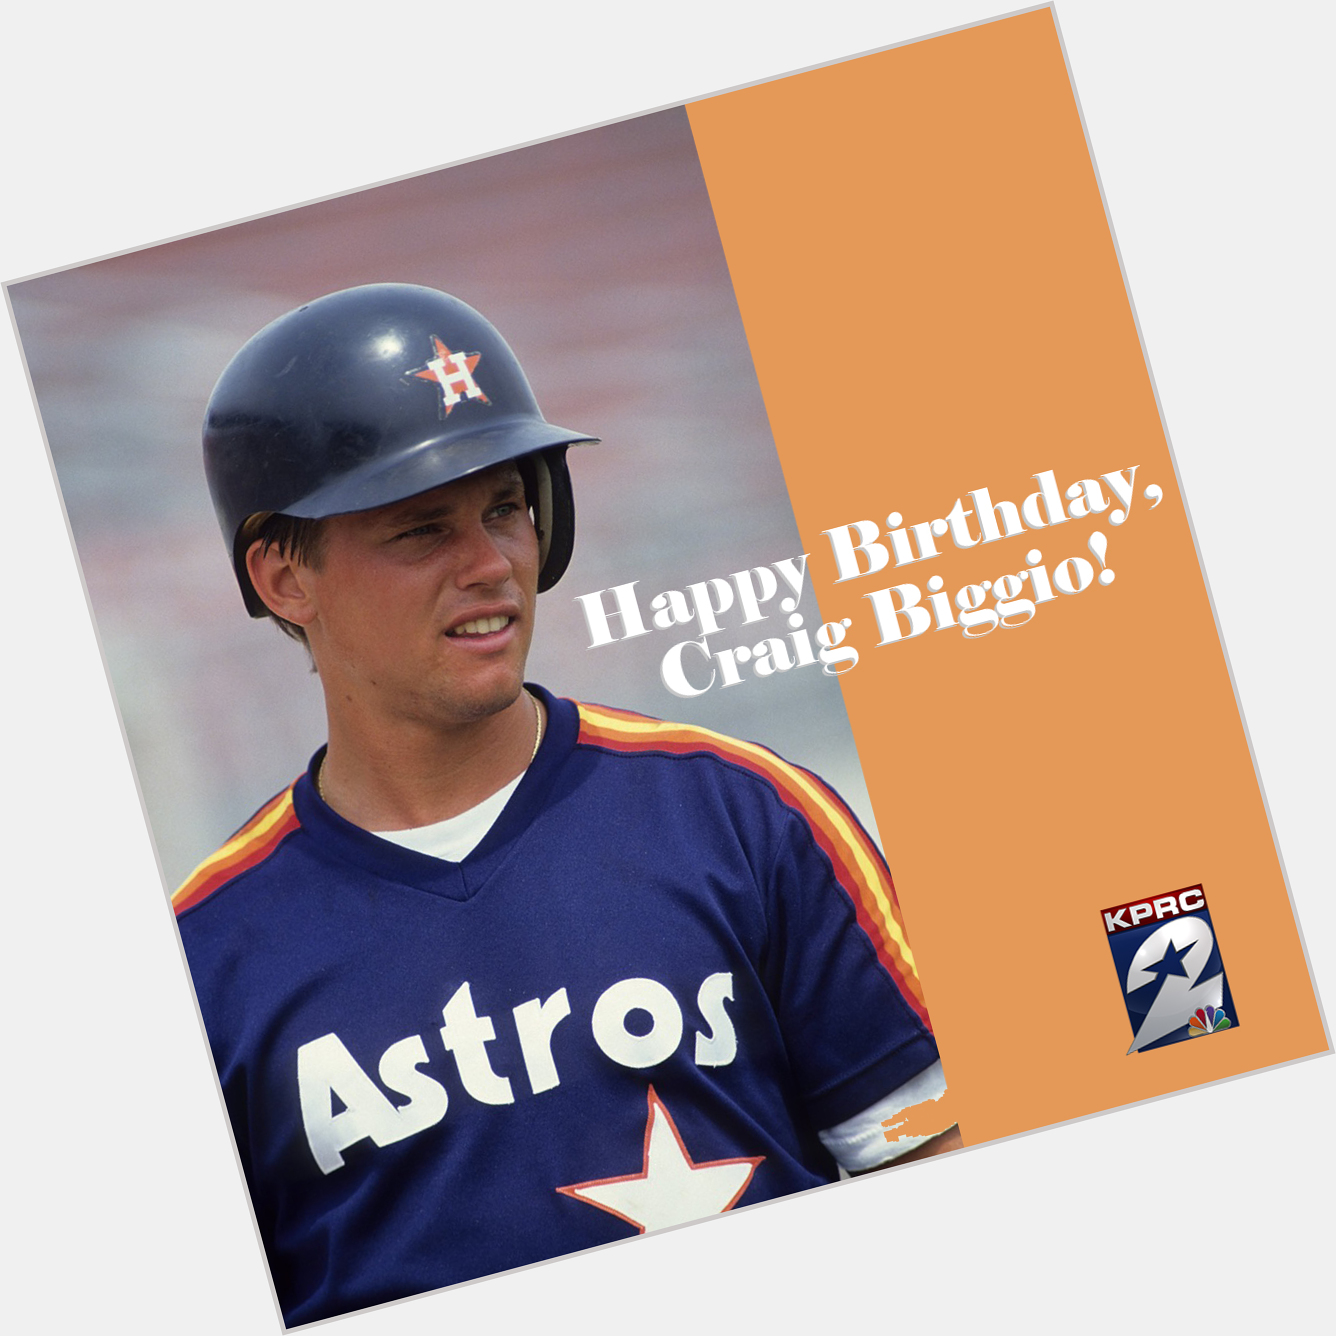 Happy Birthday, Craig Biggio! The Hall of Famer is 55 years old today!  